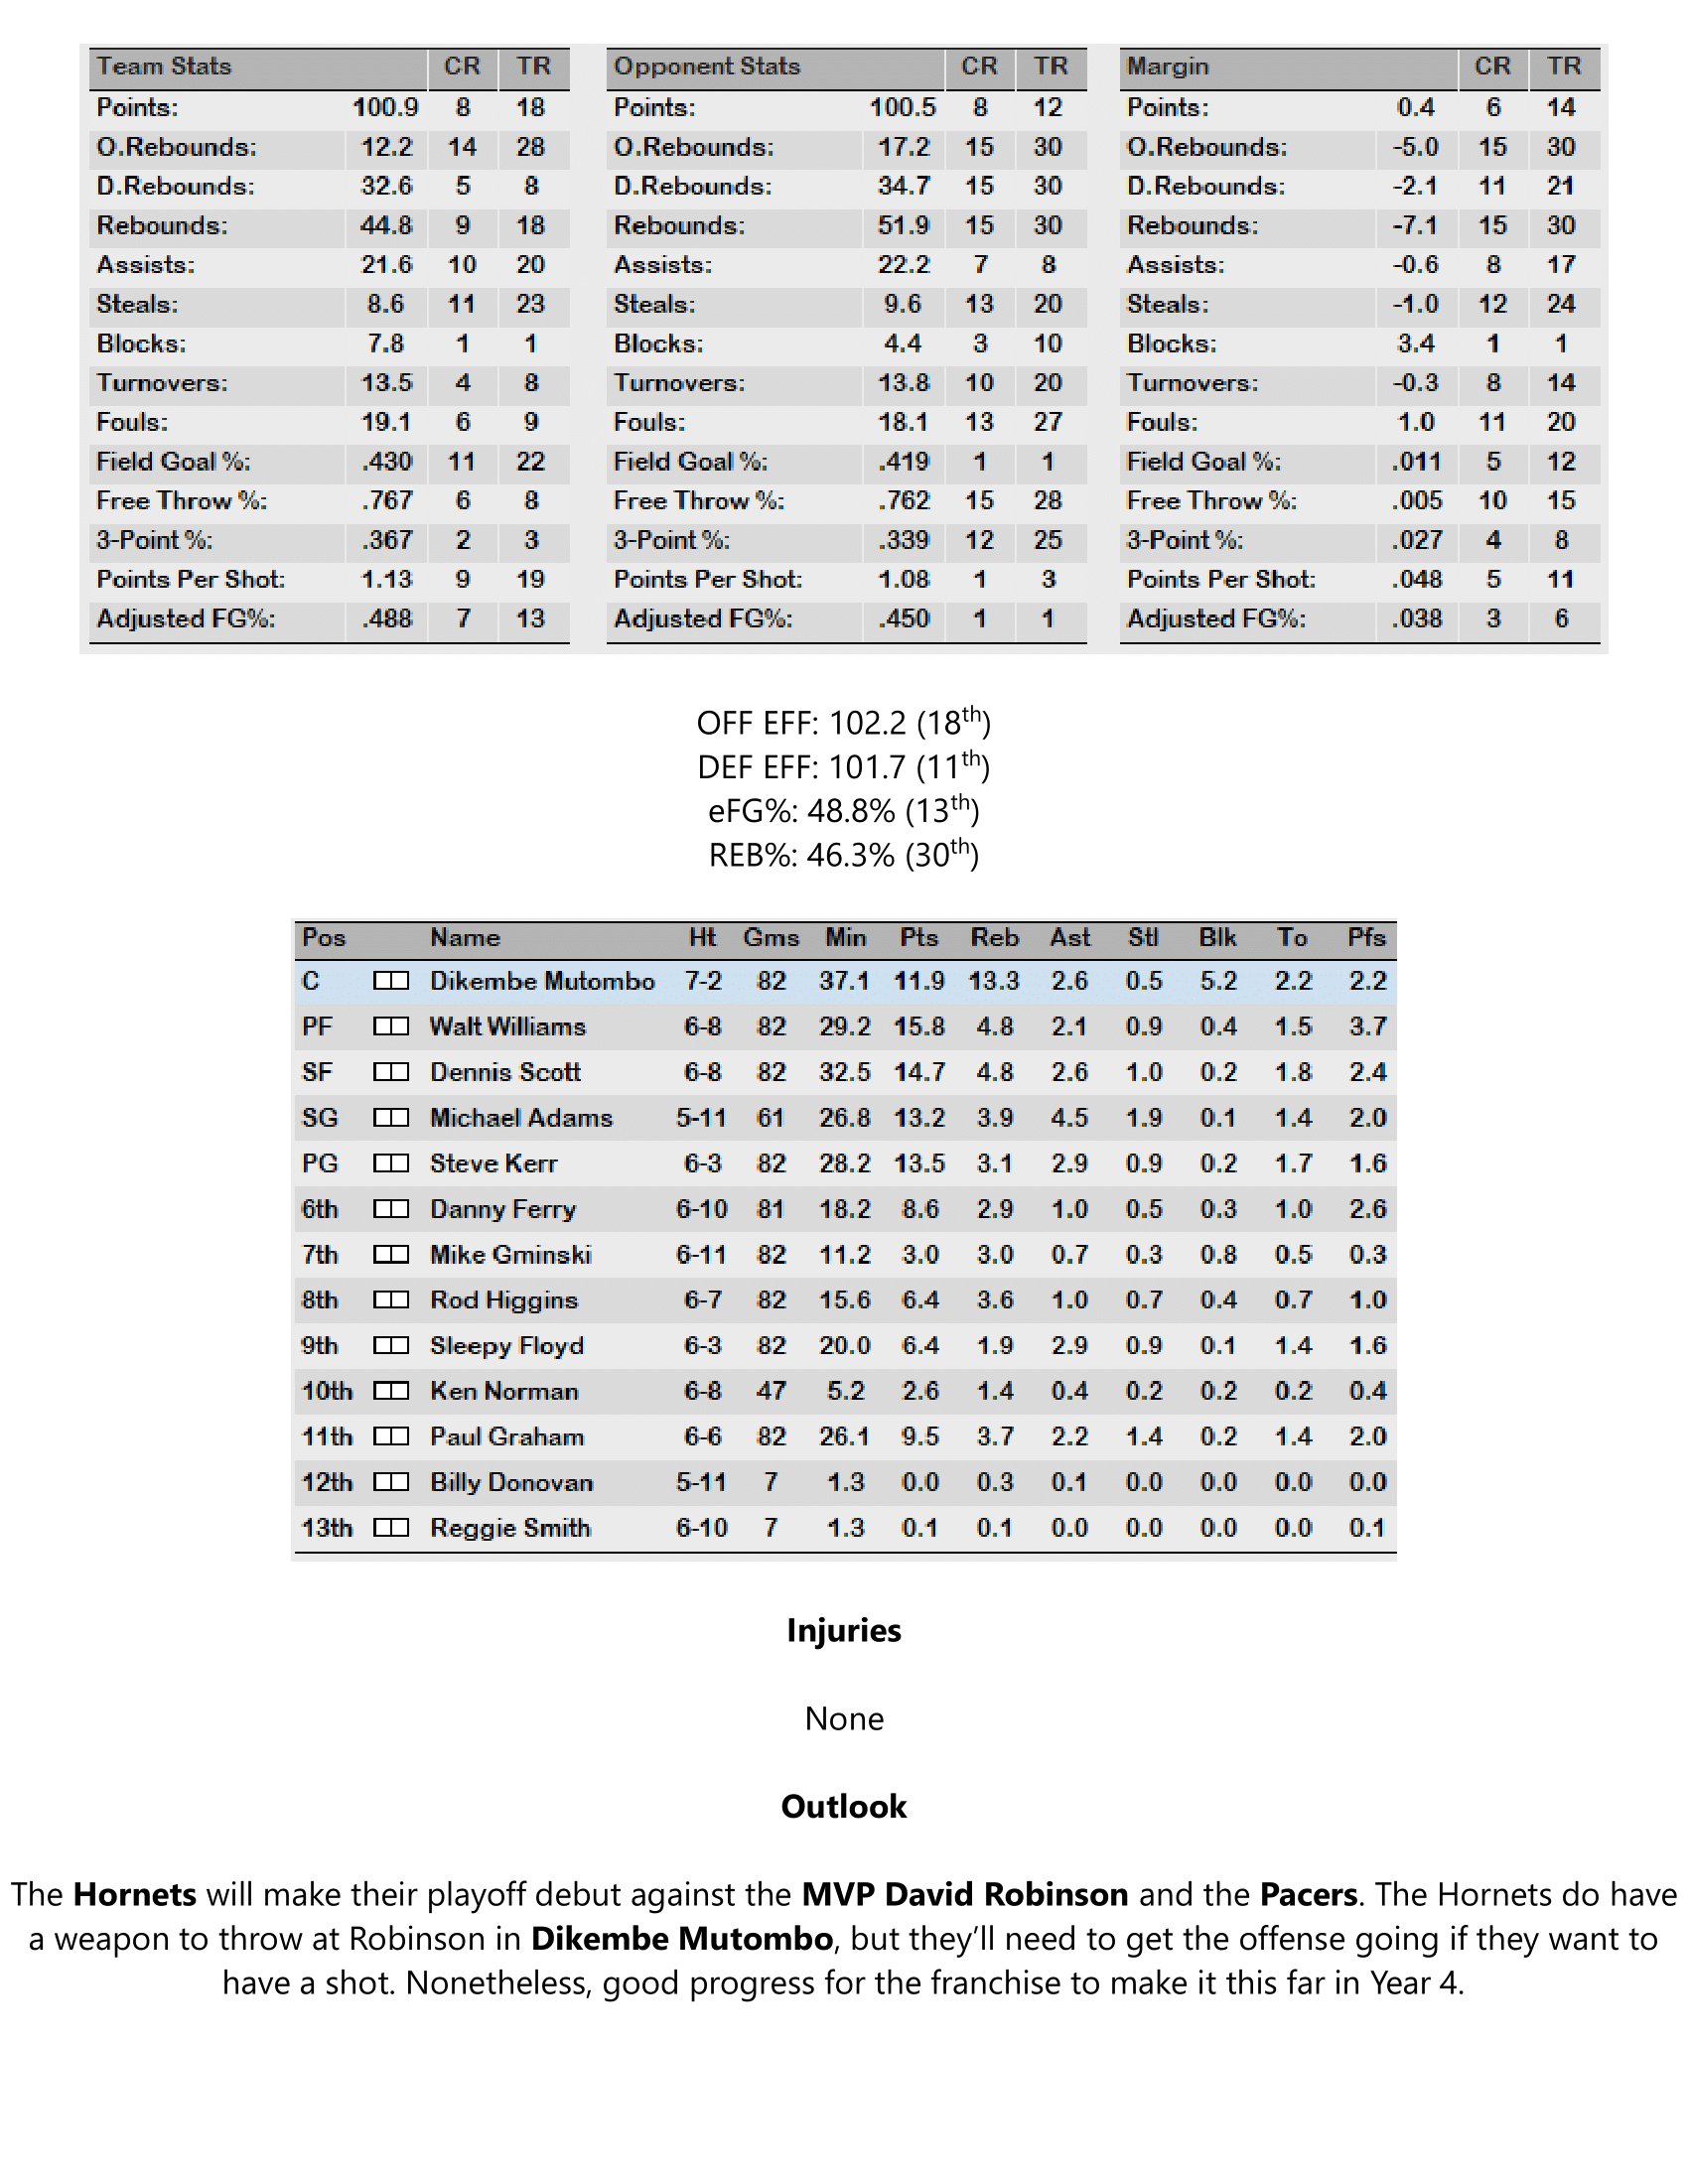 92-93-Part-4-Playoff-Preview-25.png